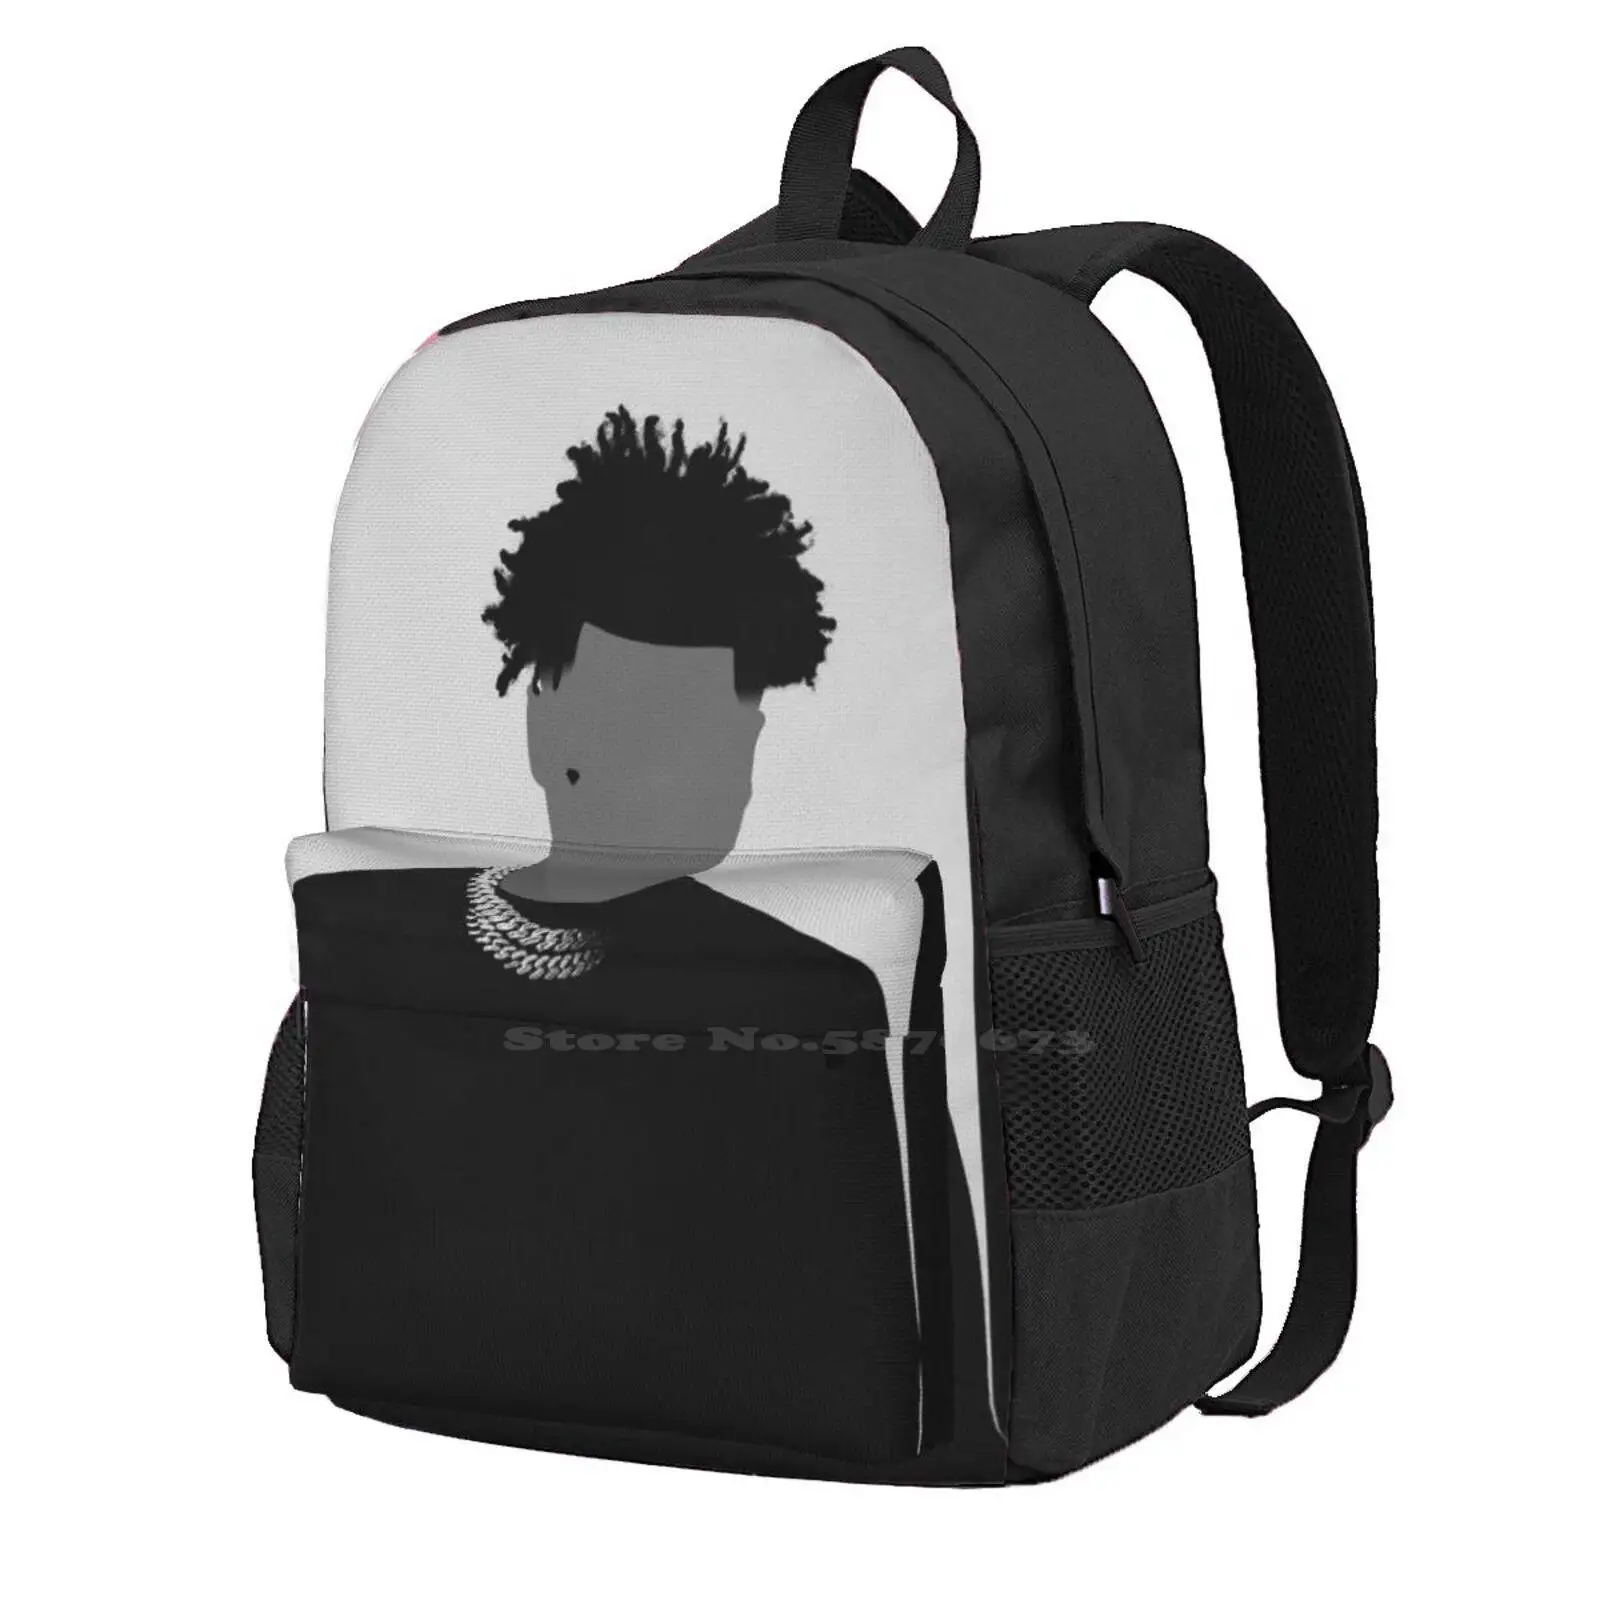 Youngboy Fashion Travel Laptop School Backpack Bag Youngboy Never Broke Again Top 38 Baby Nle Choppa Dababy My Turn Blame On It